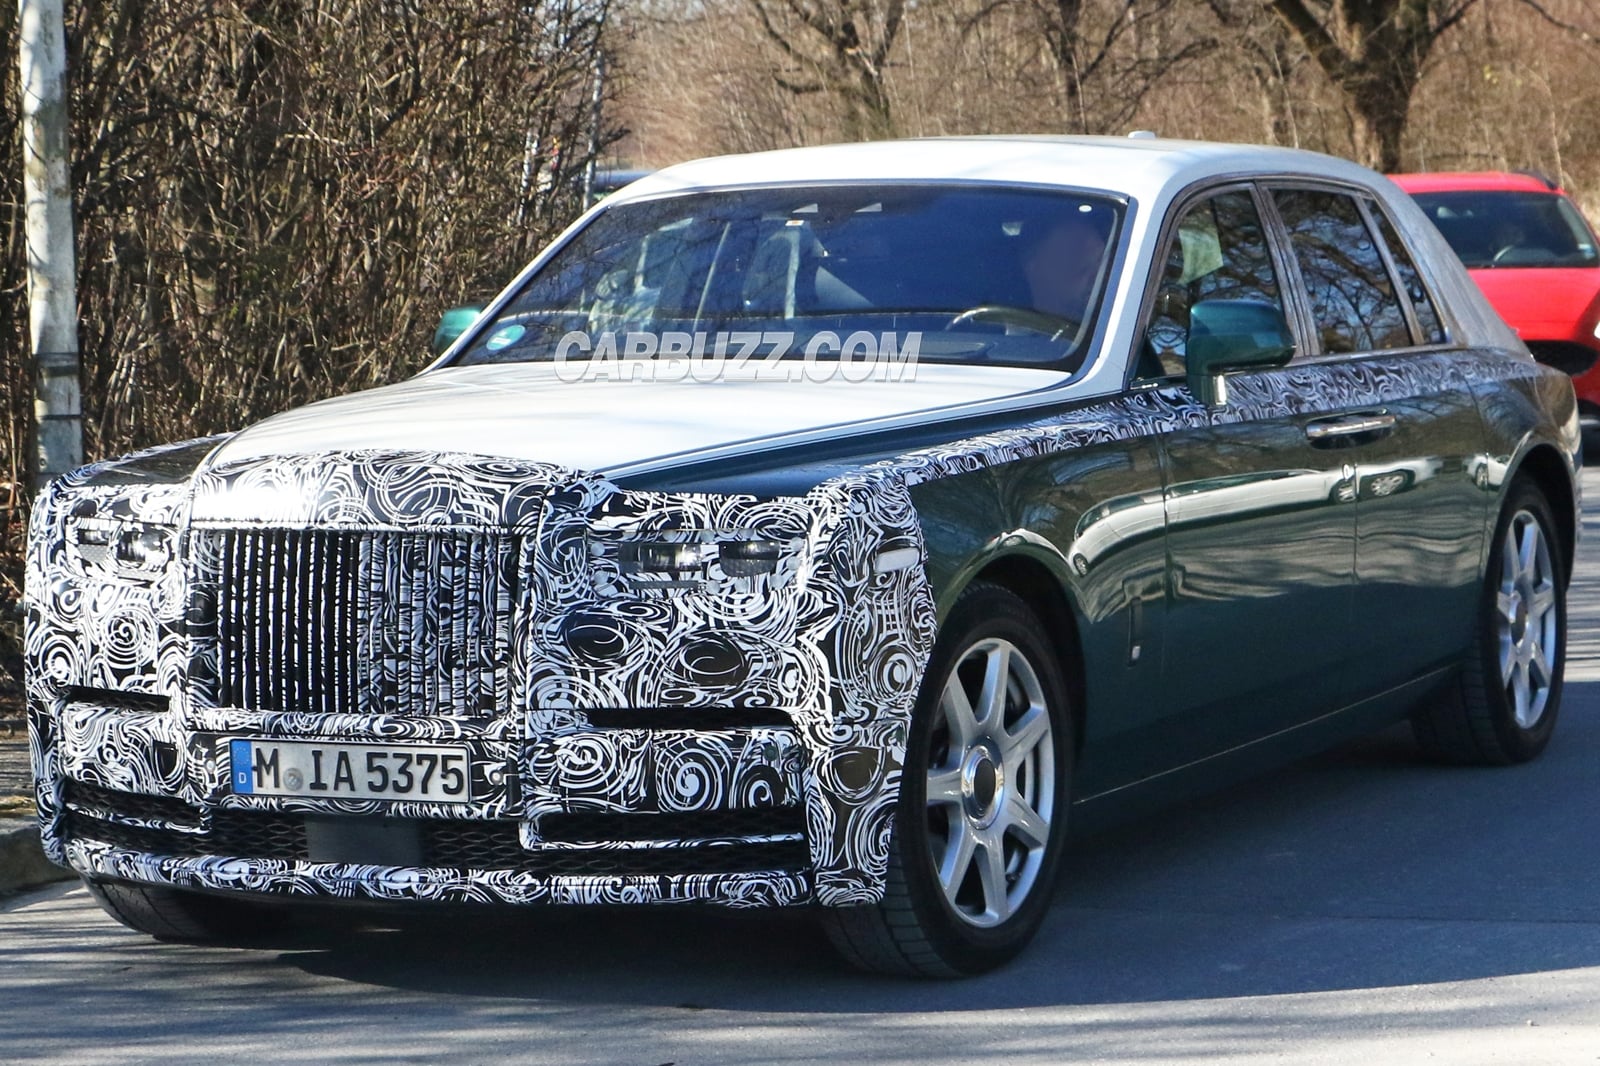 NEW 2024 Rolls Royce Phantom: The Most Expensive & Luxurious 